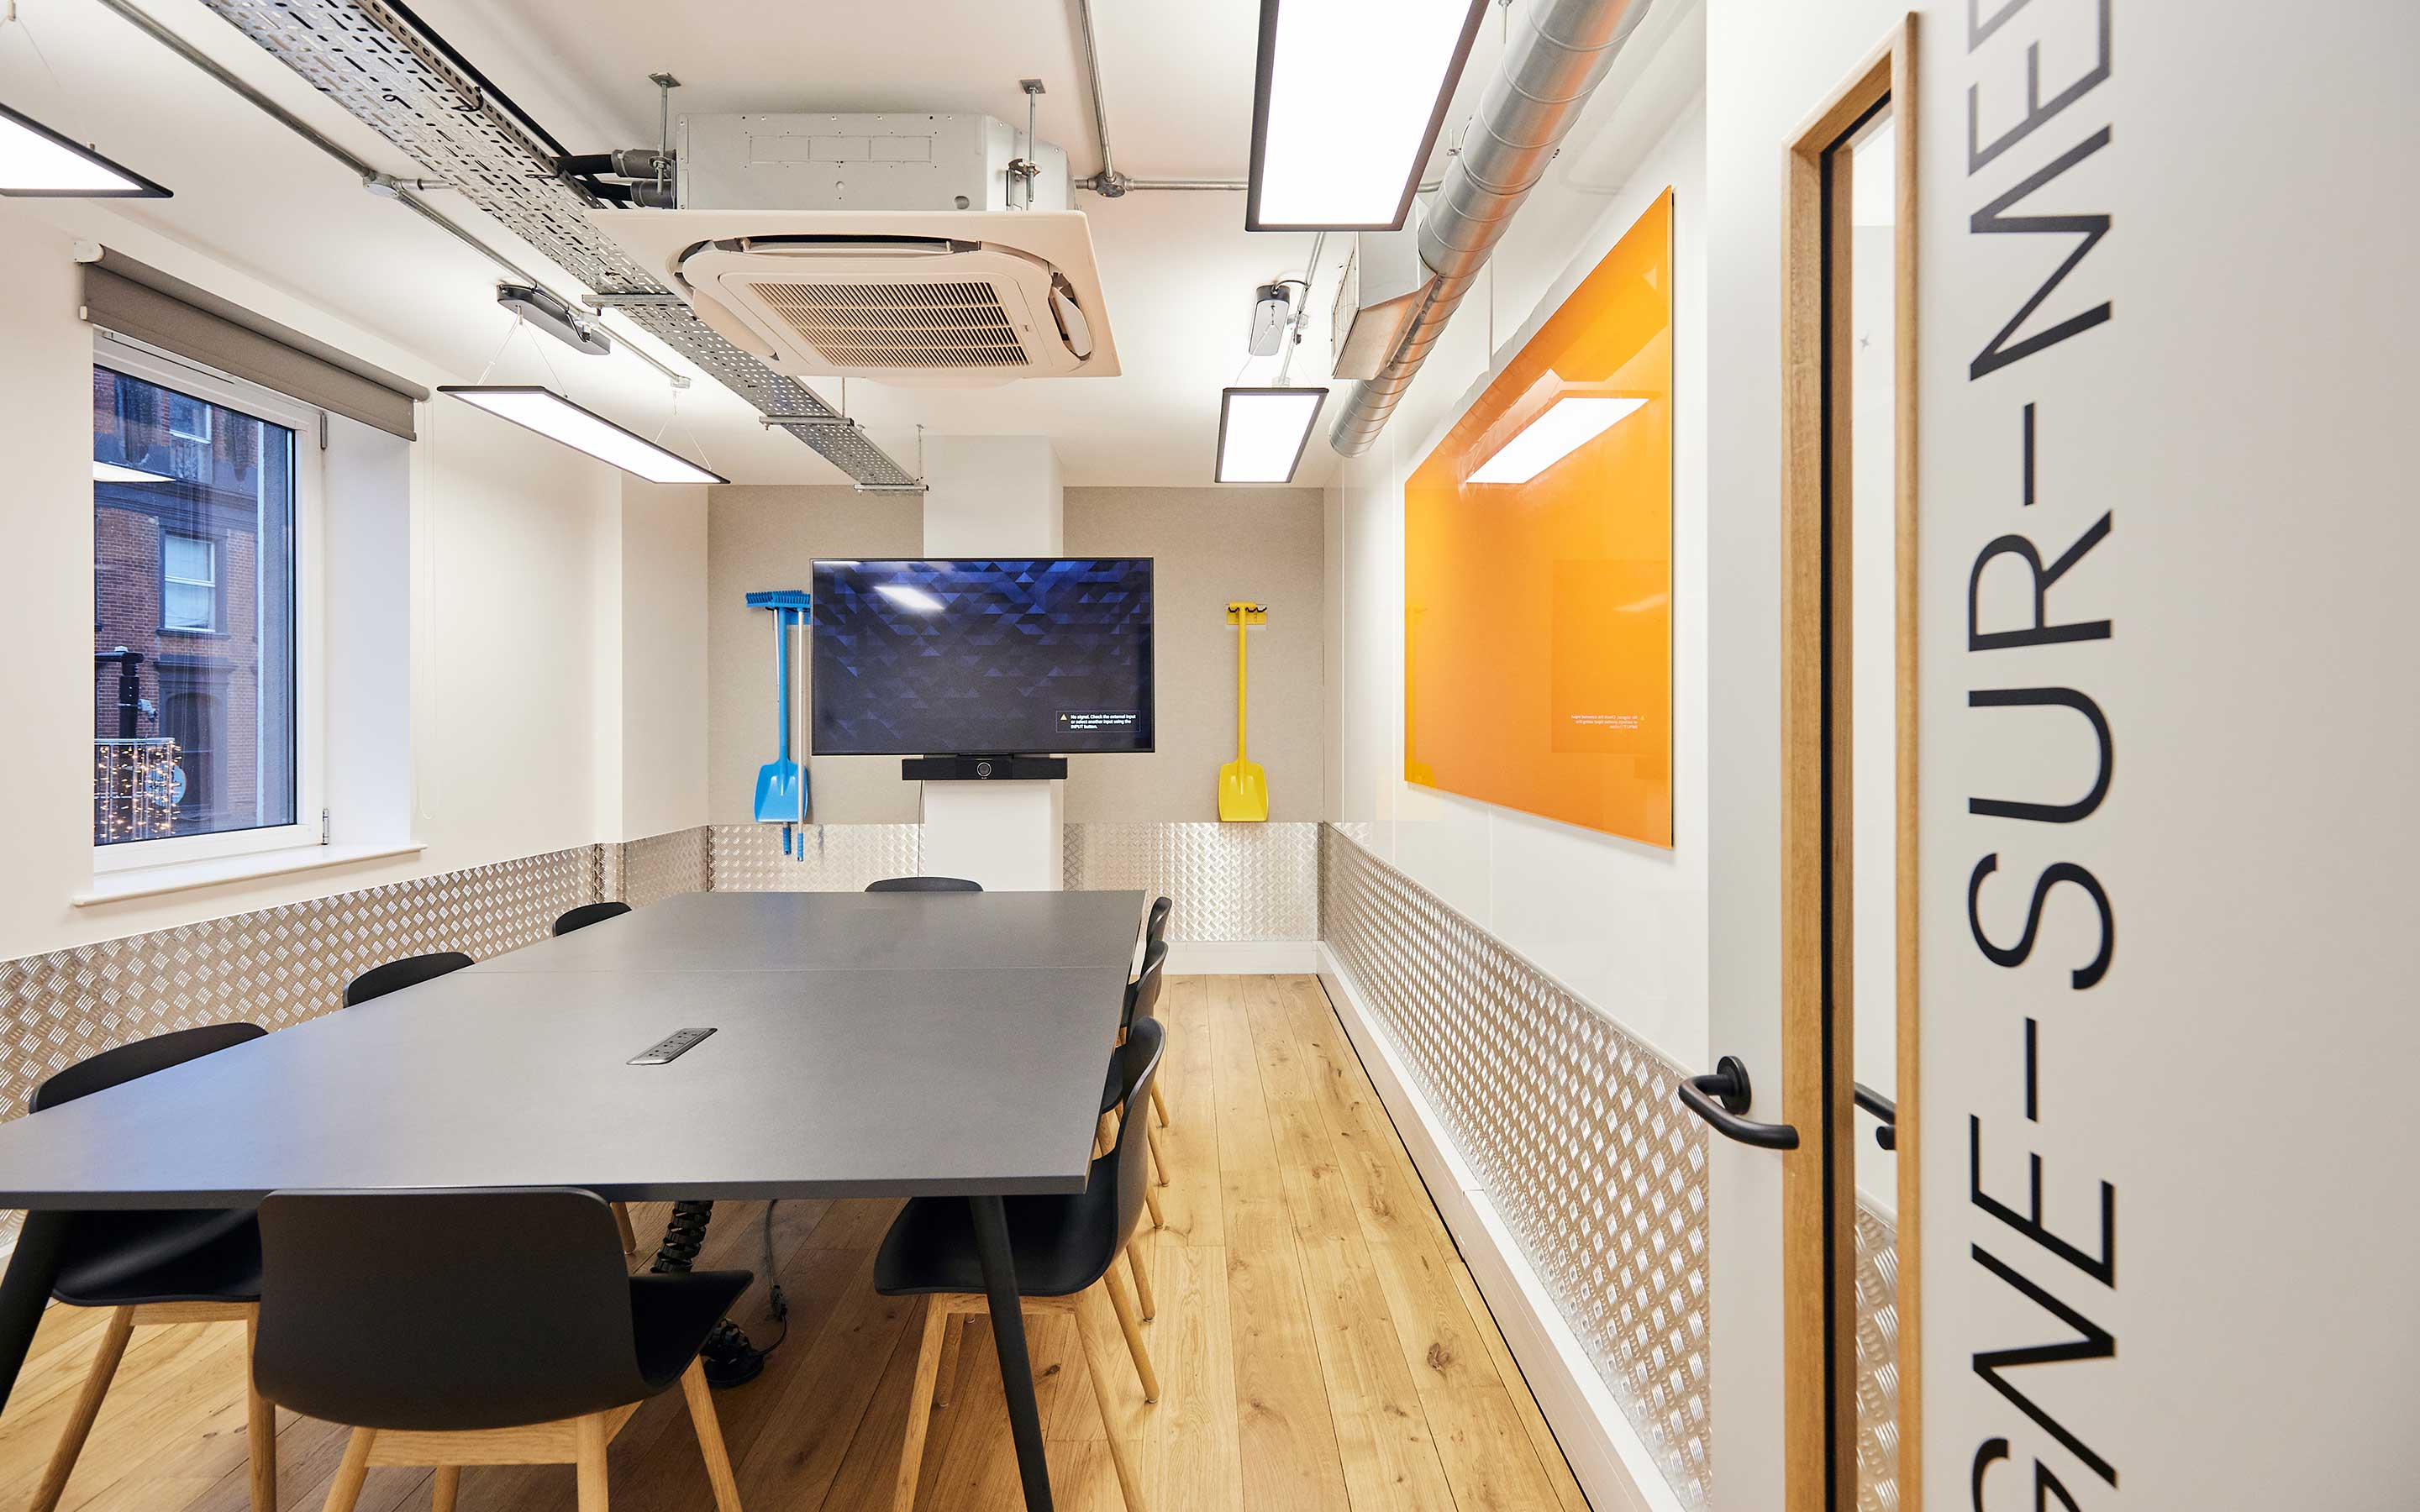 A meeting room with tables and chairs and an orange whiteboard in a sleek office interior design